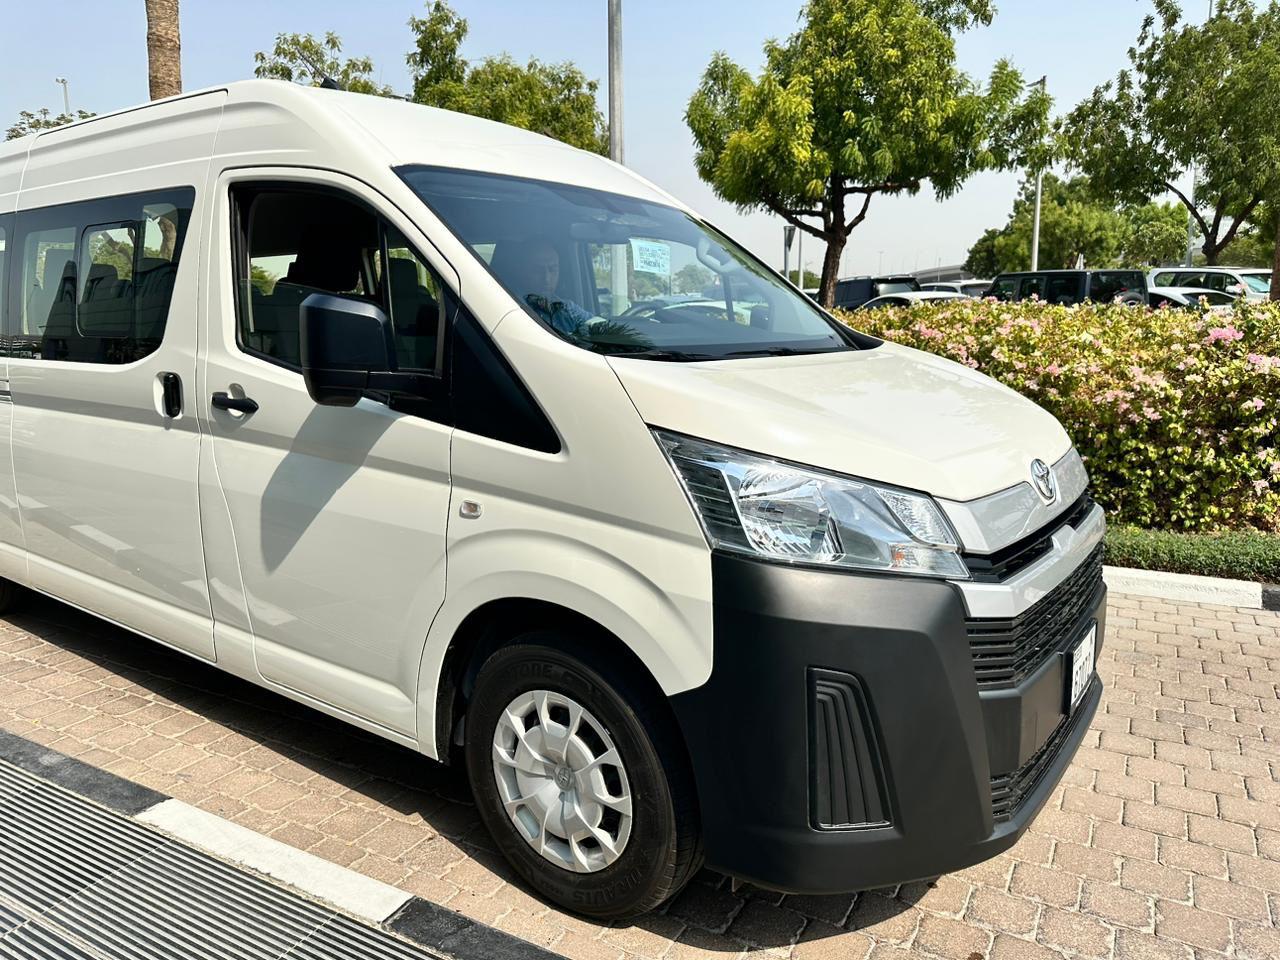 Toyota Hiace 14 seater van front view in white color